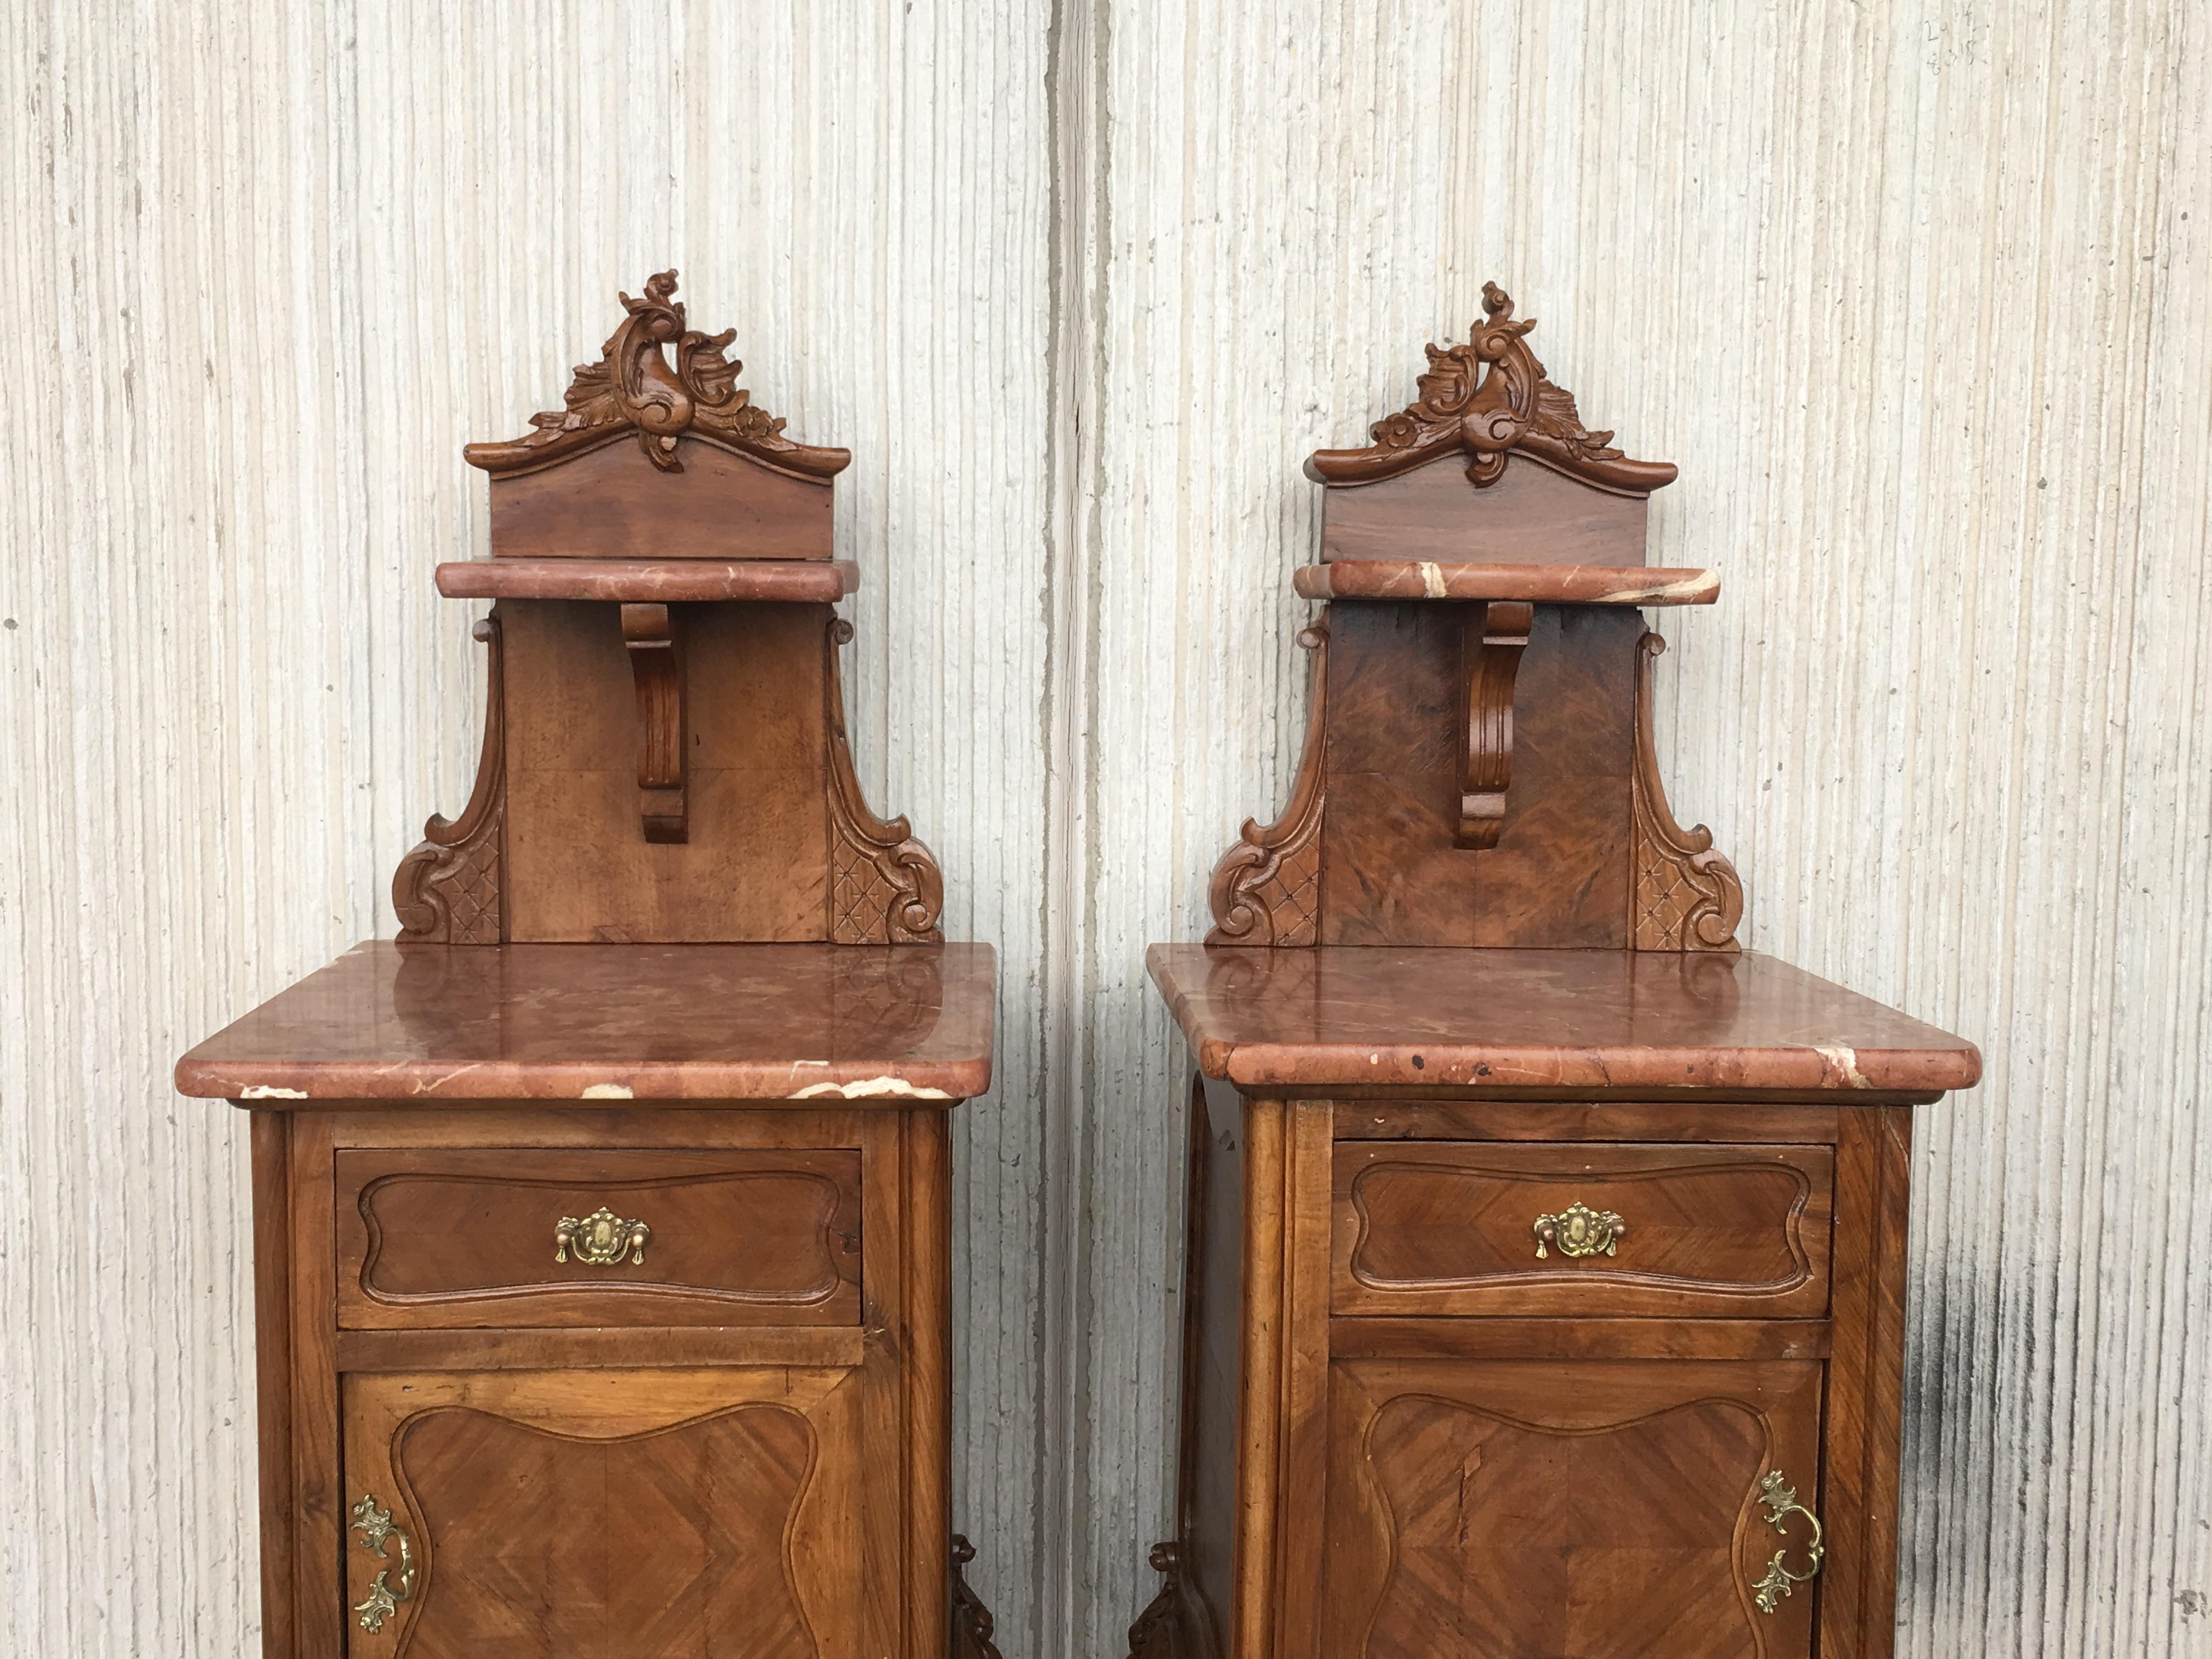 Spanish Tall and High Top Solid Oak Bedside Cabinets with Marble Top and Drawer